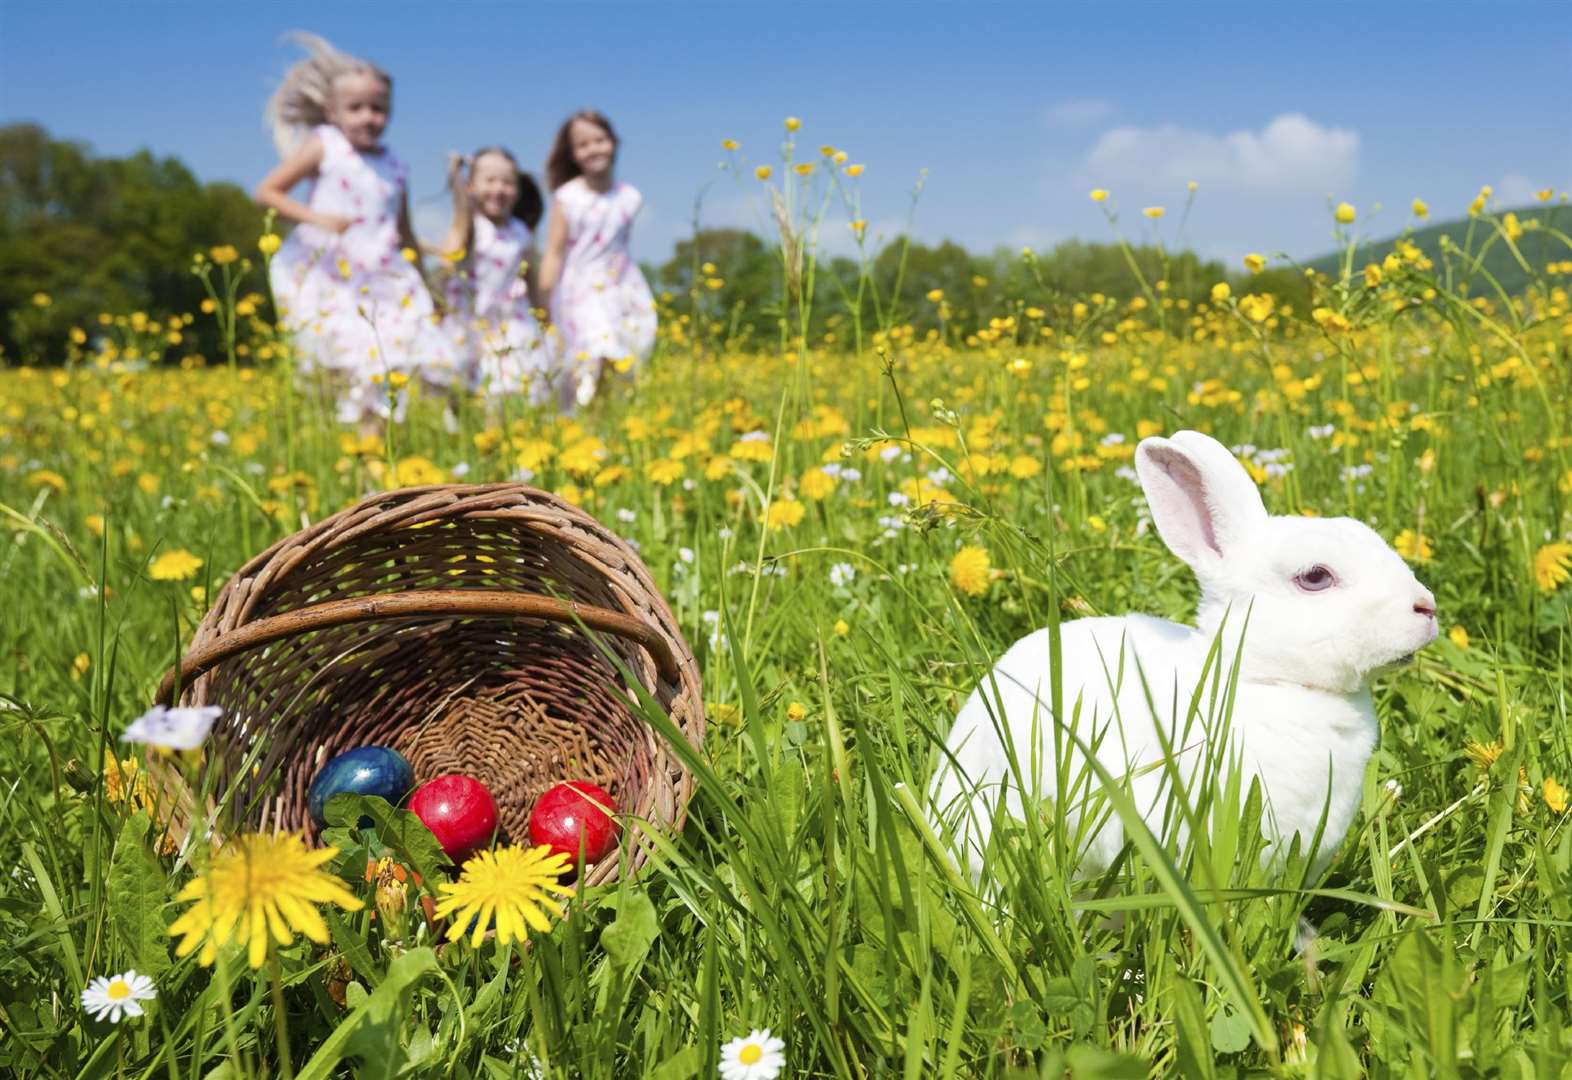 Things to do over the Easter bank holiday in Kent